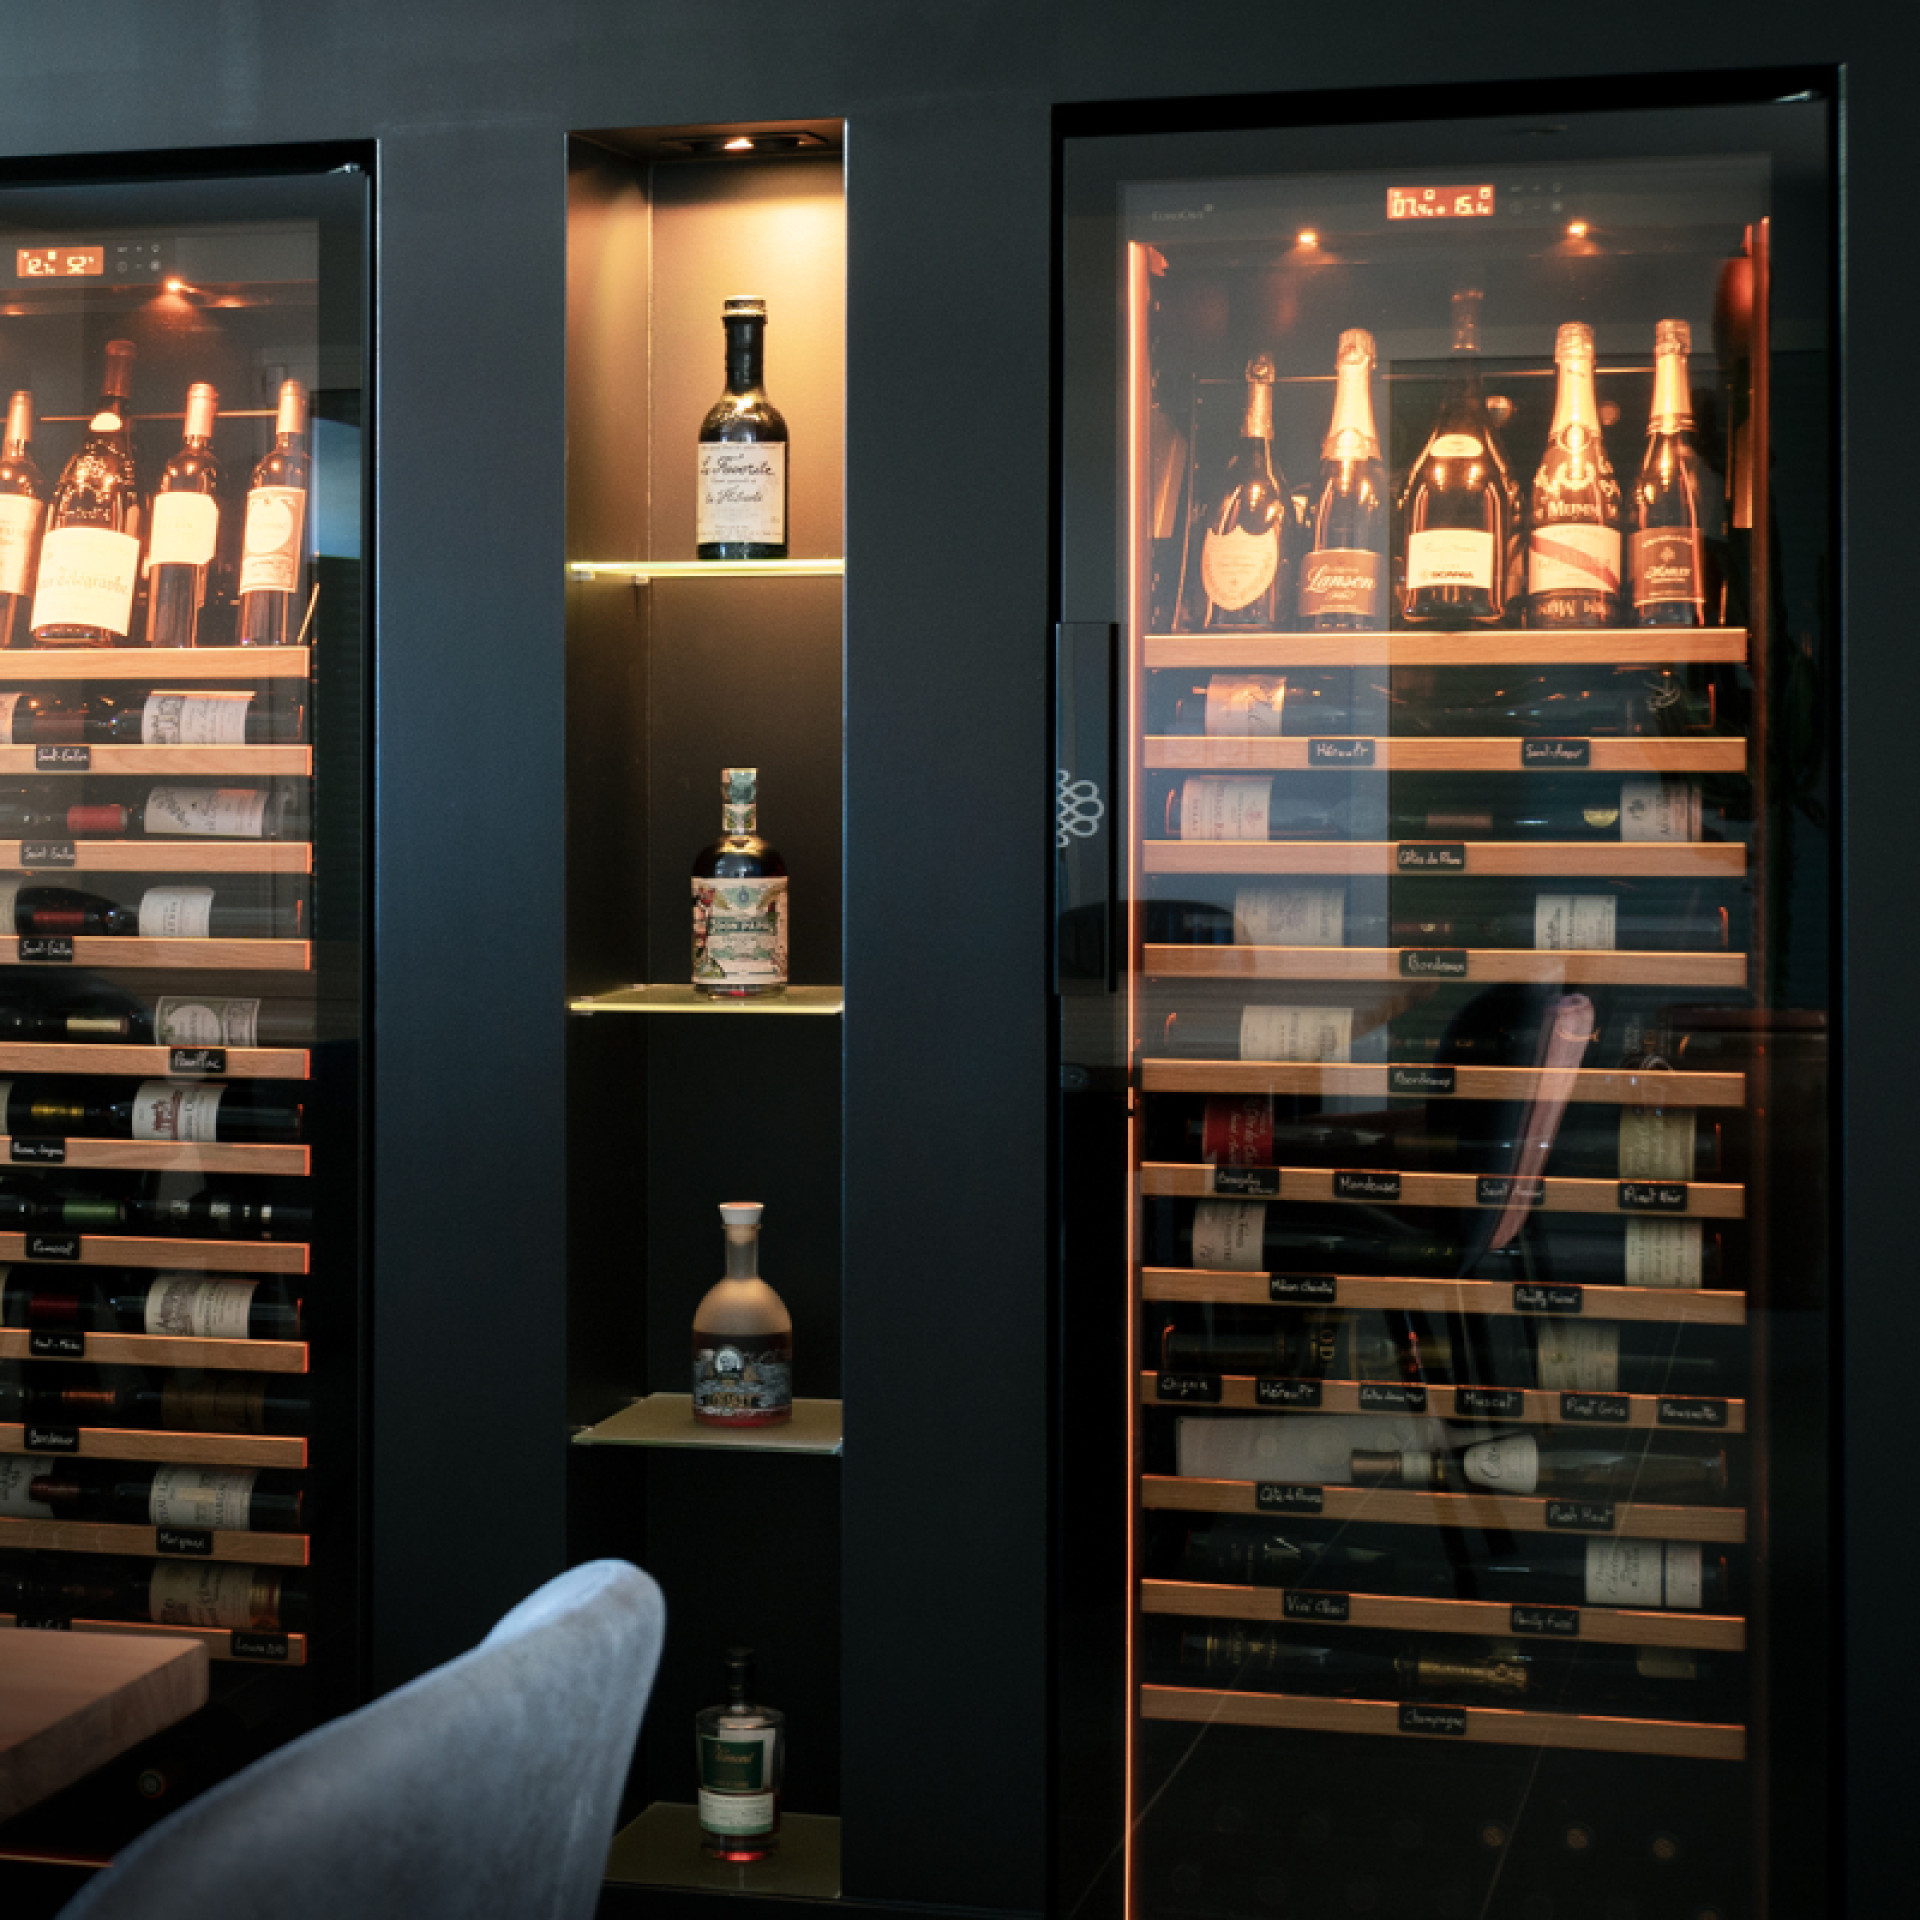 Professional wine coolers with premium options, built into a niche in the wall, with beautiful bottle lighting in the cabinet.